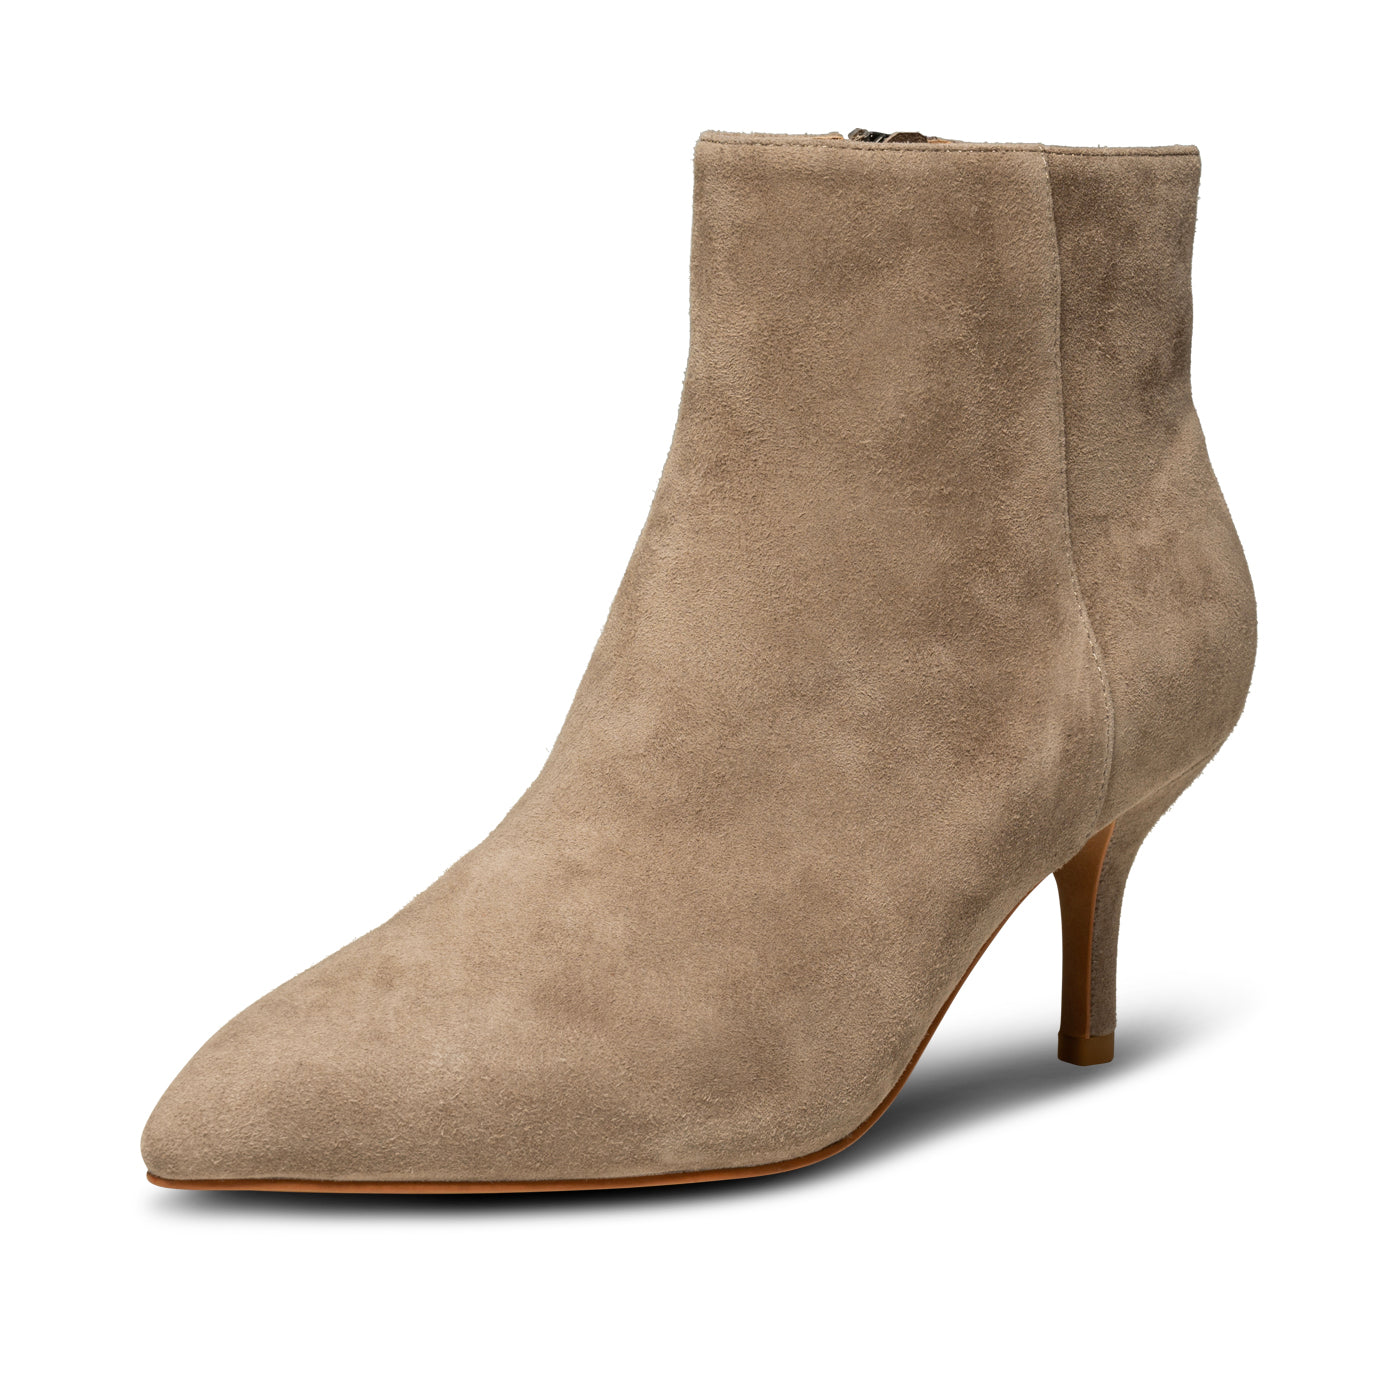 SHOE THE BEAR WOMENS Vega Bootie Suede Heels 160 TAUPE